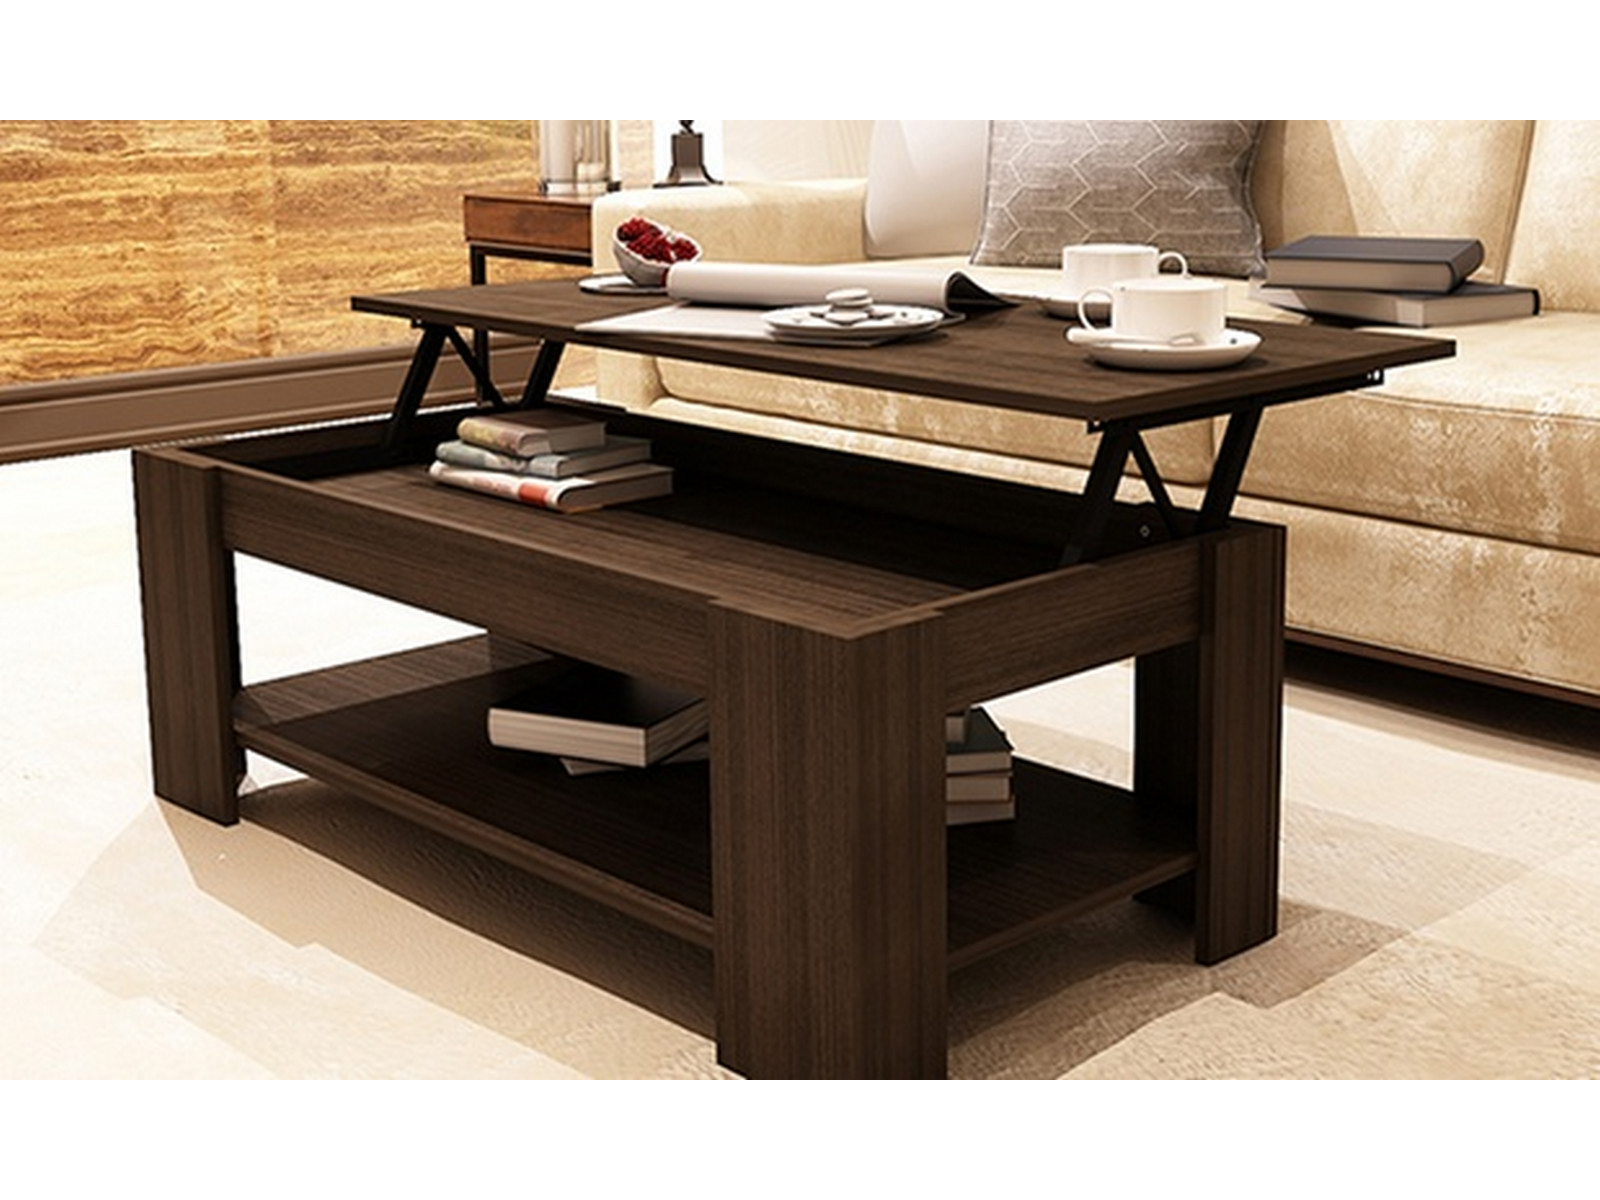 New Caspian Espresso Lift Up Top Coffee Table With Storage Shelf for dimensions 1600 X 1200